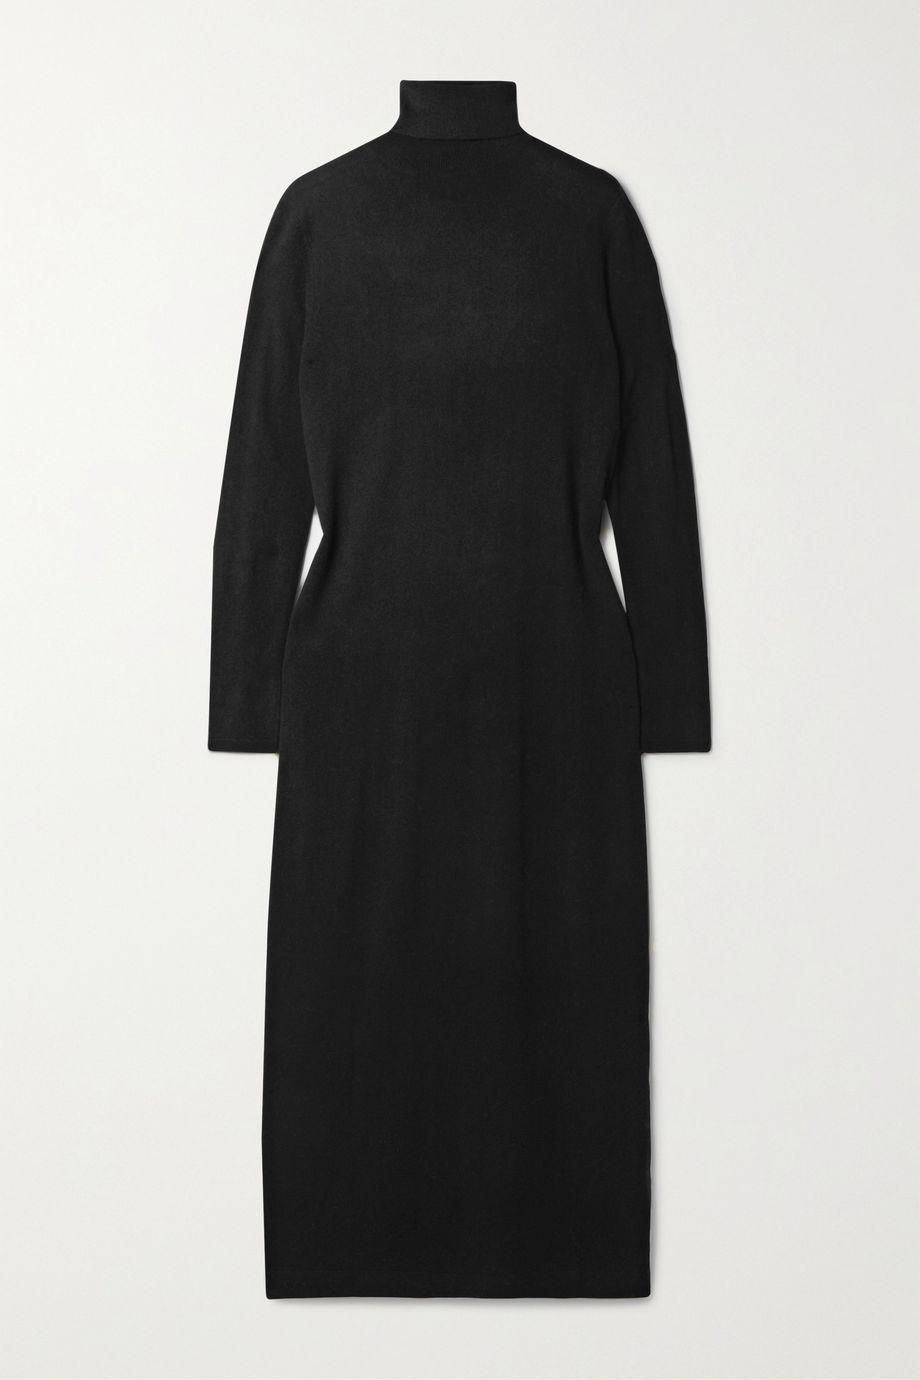 Wool and cashmere-blend turtleneck midi dress by ALLUDE